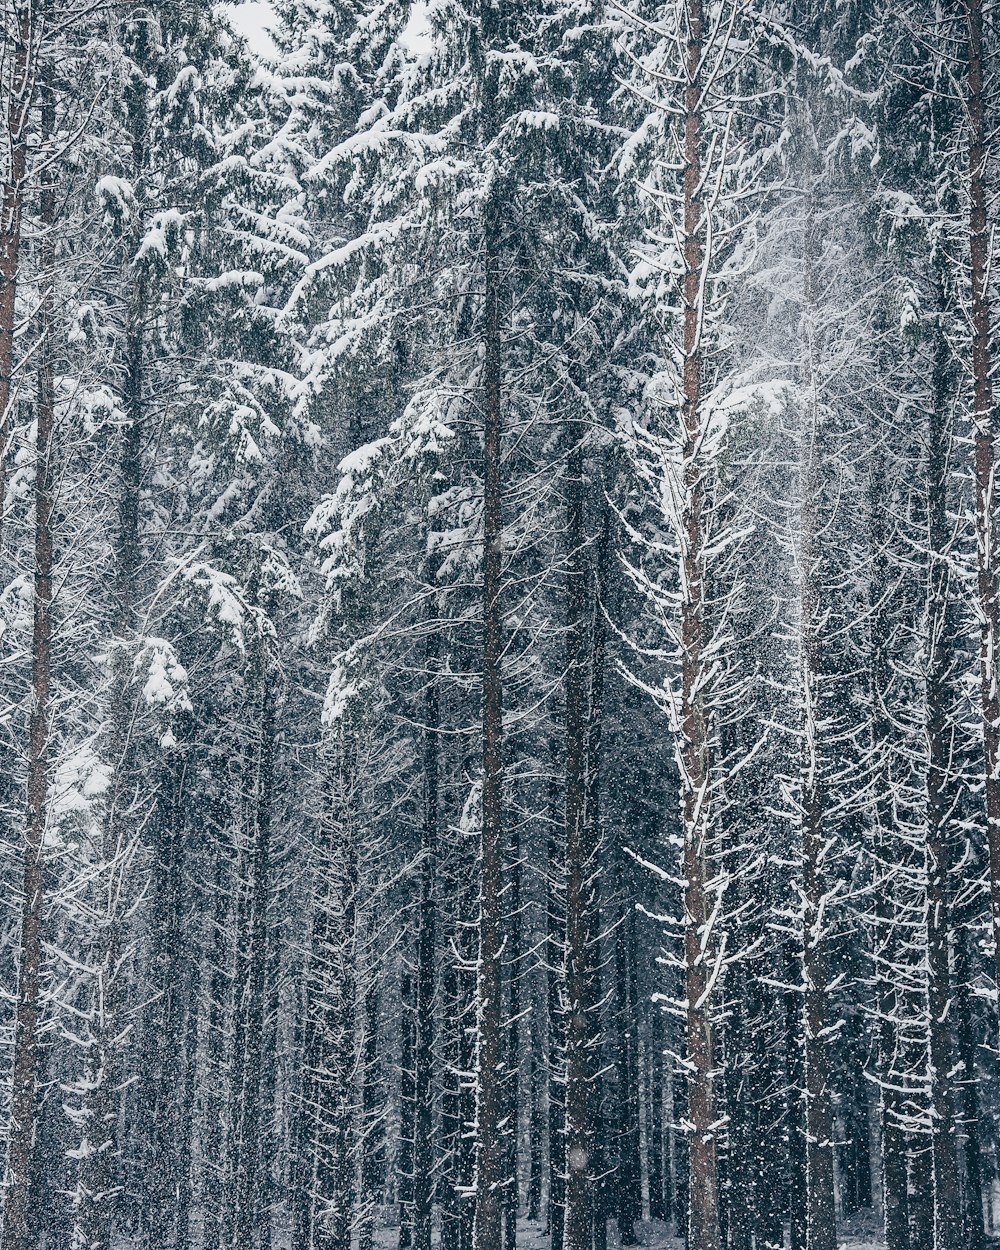 a forest filled with lots of snow covered trees